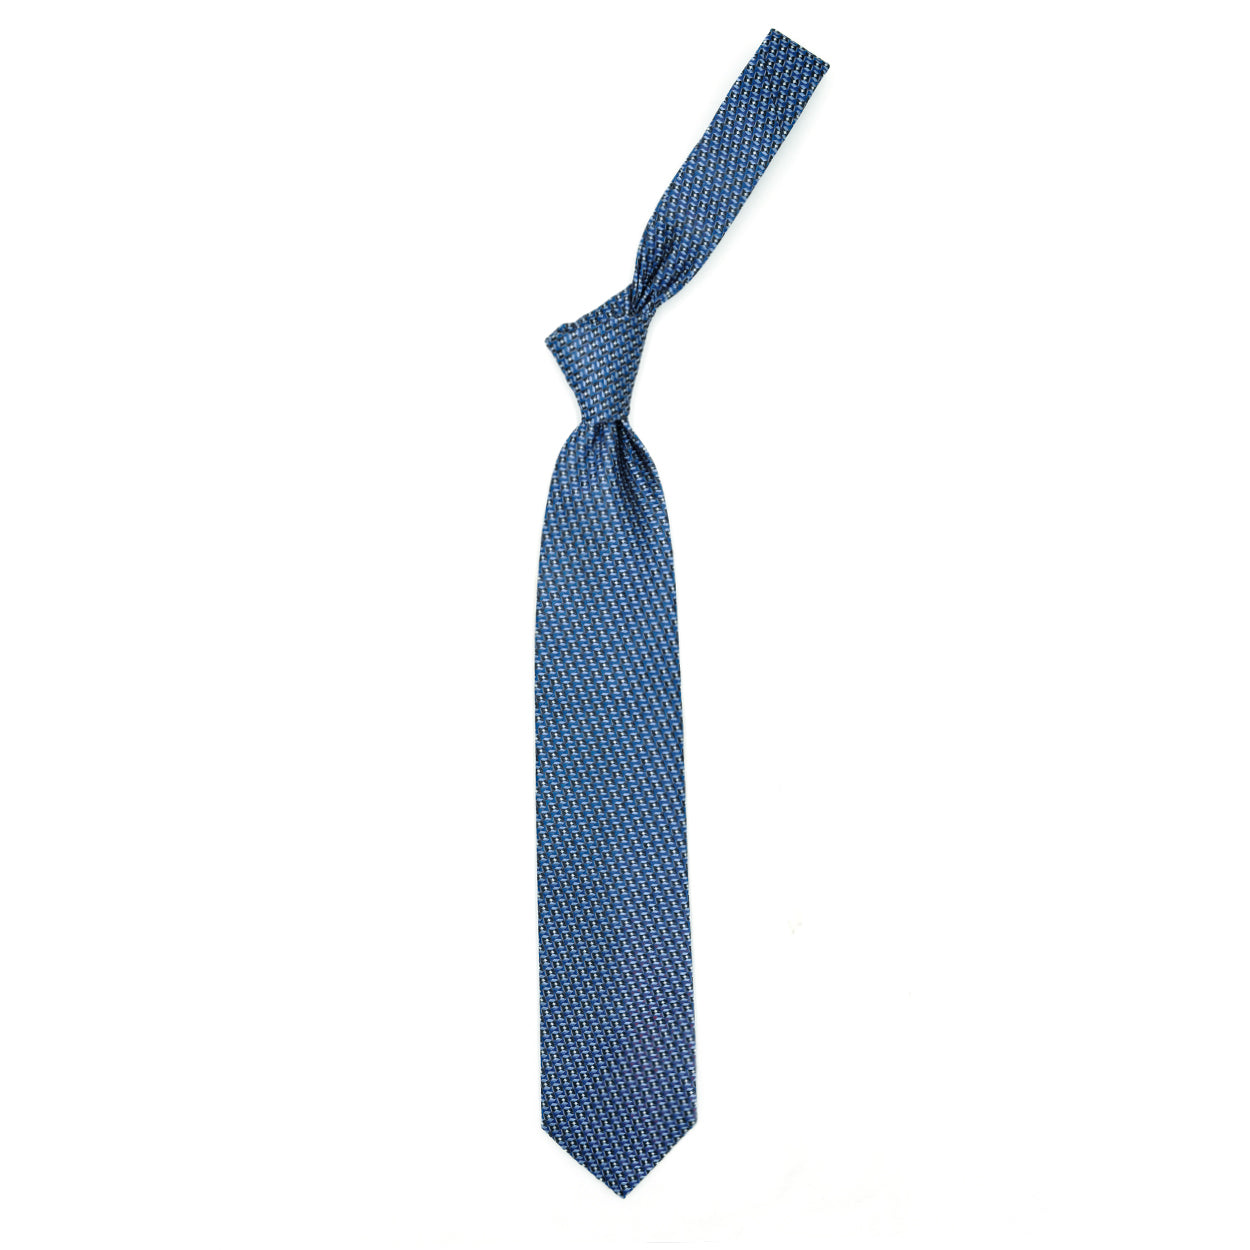 Light blue tie with blue, light blue and white geometric pattern